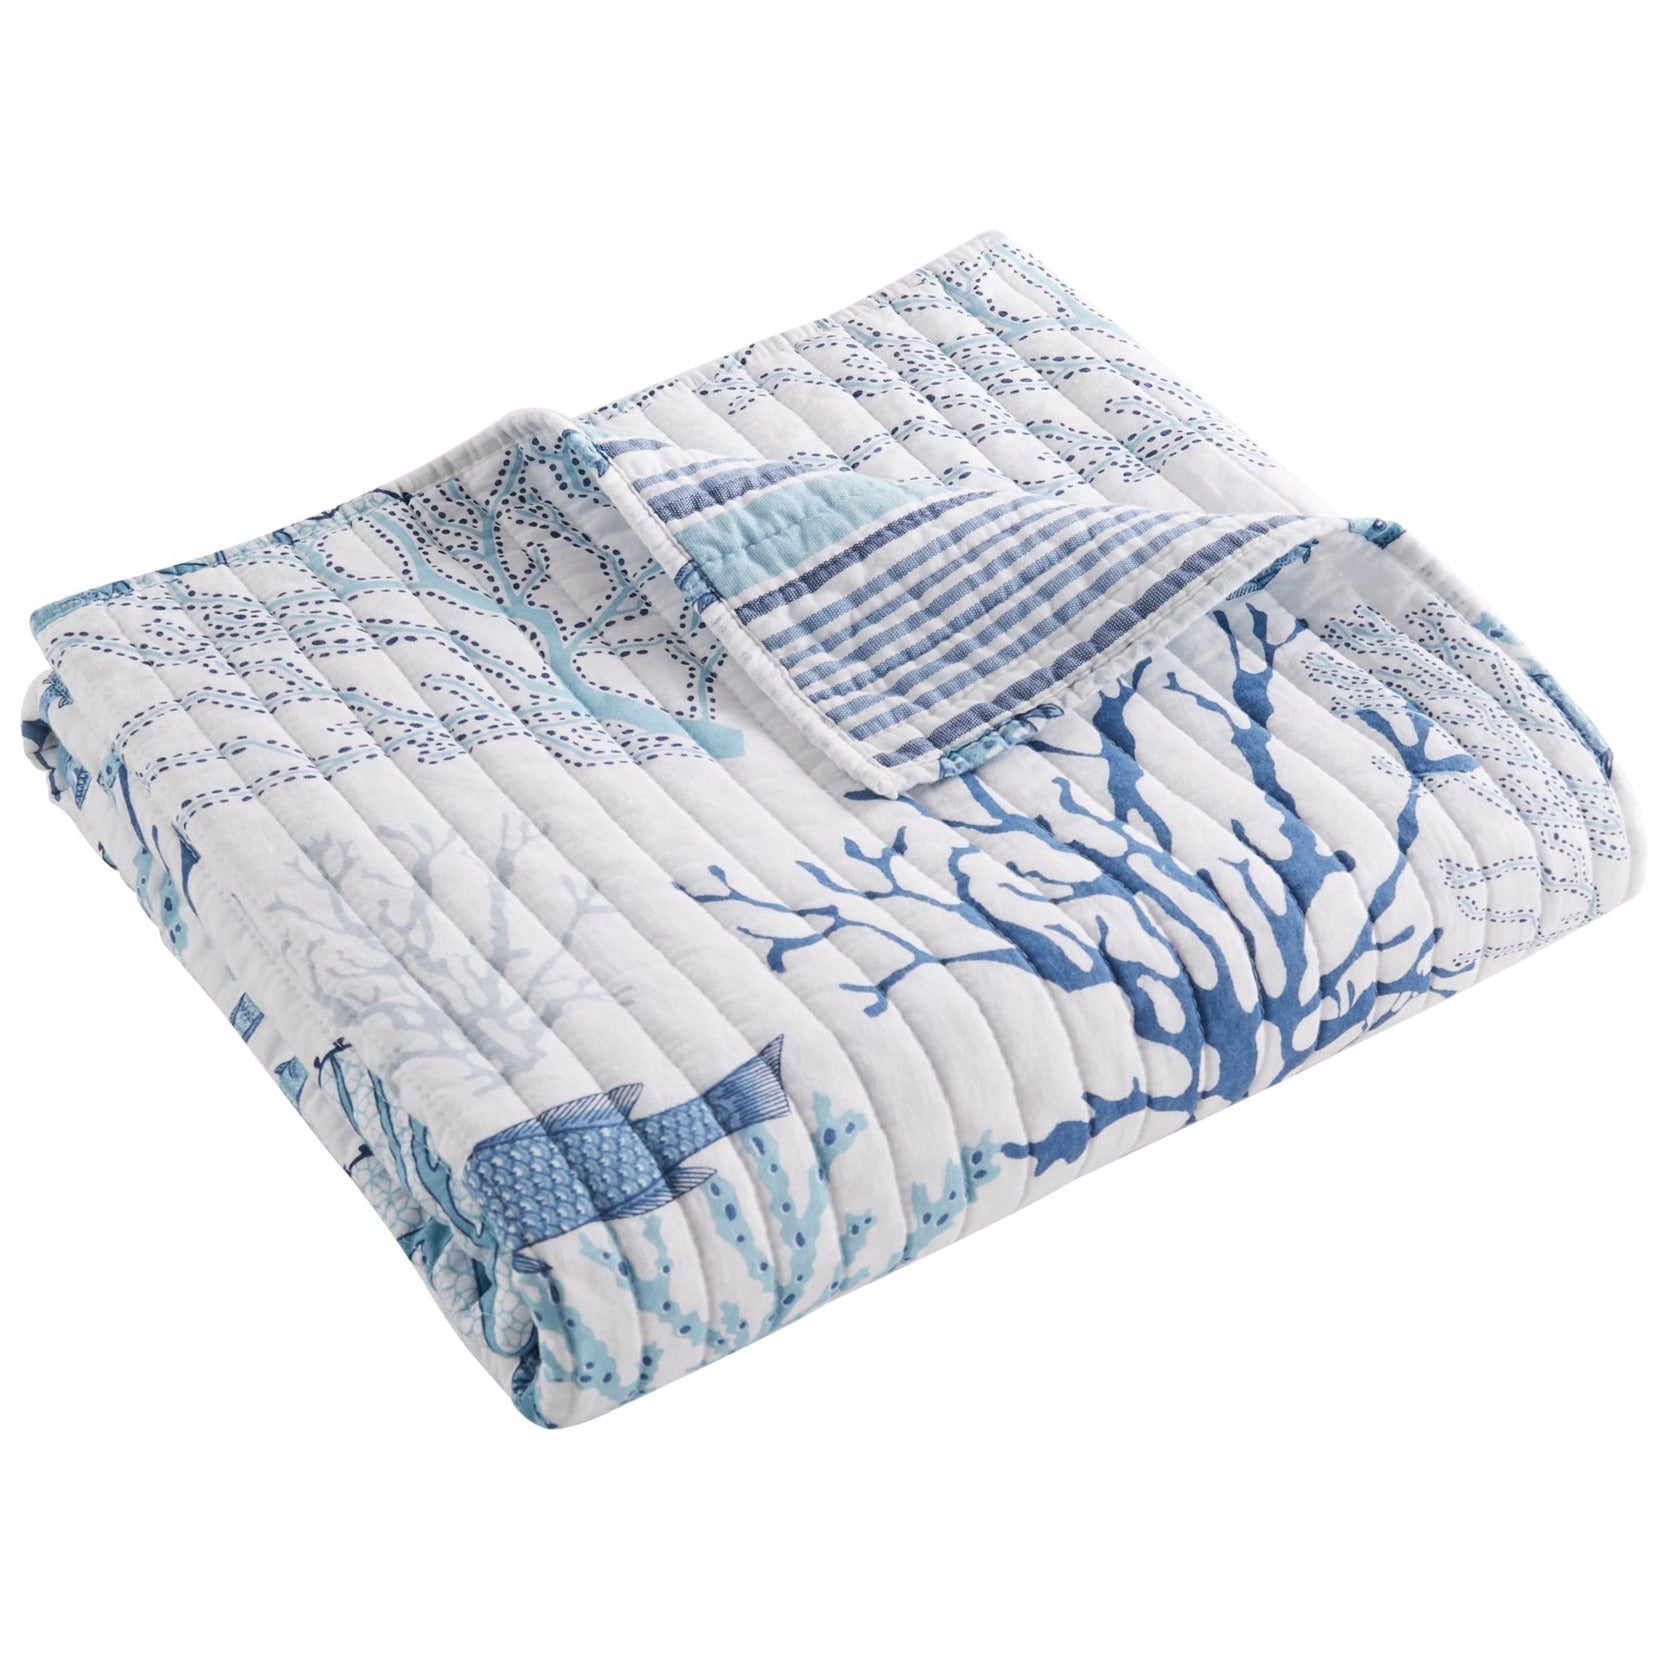 Lacey Sea Quilted Throw